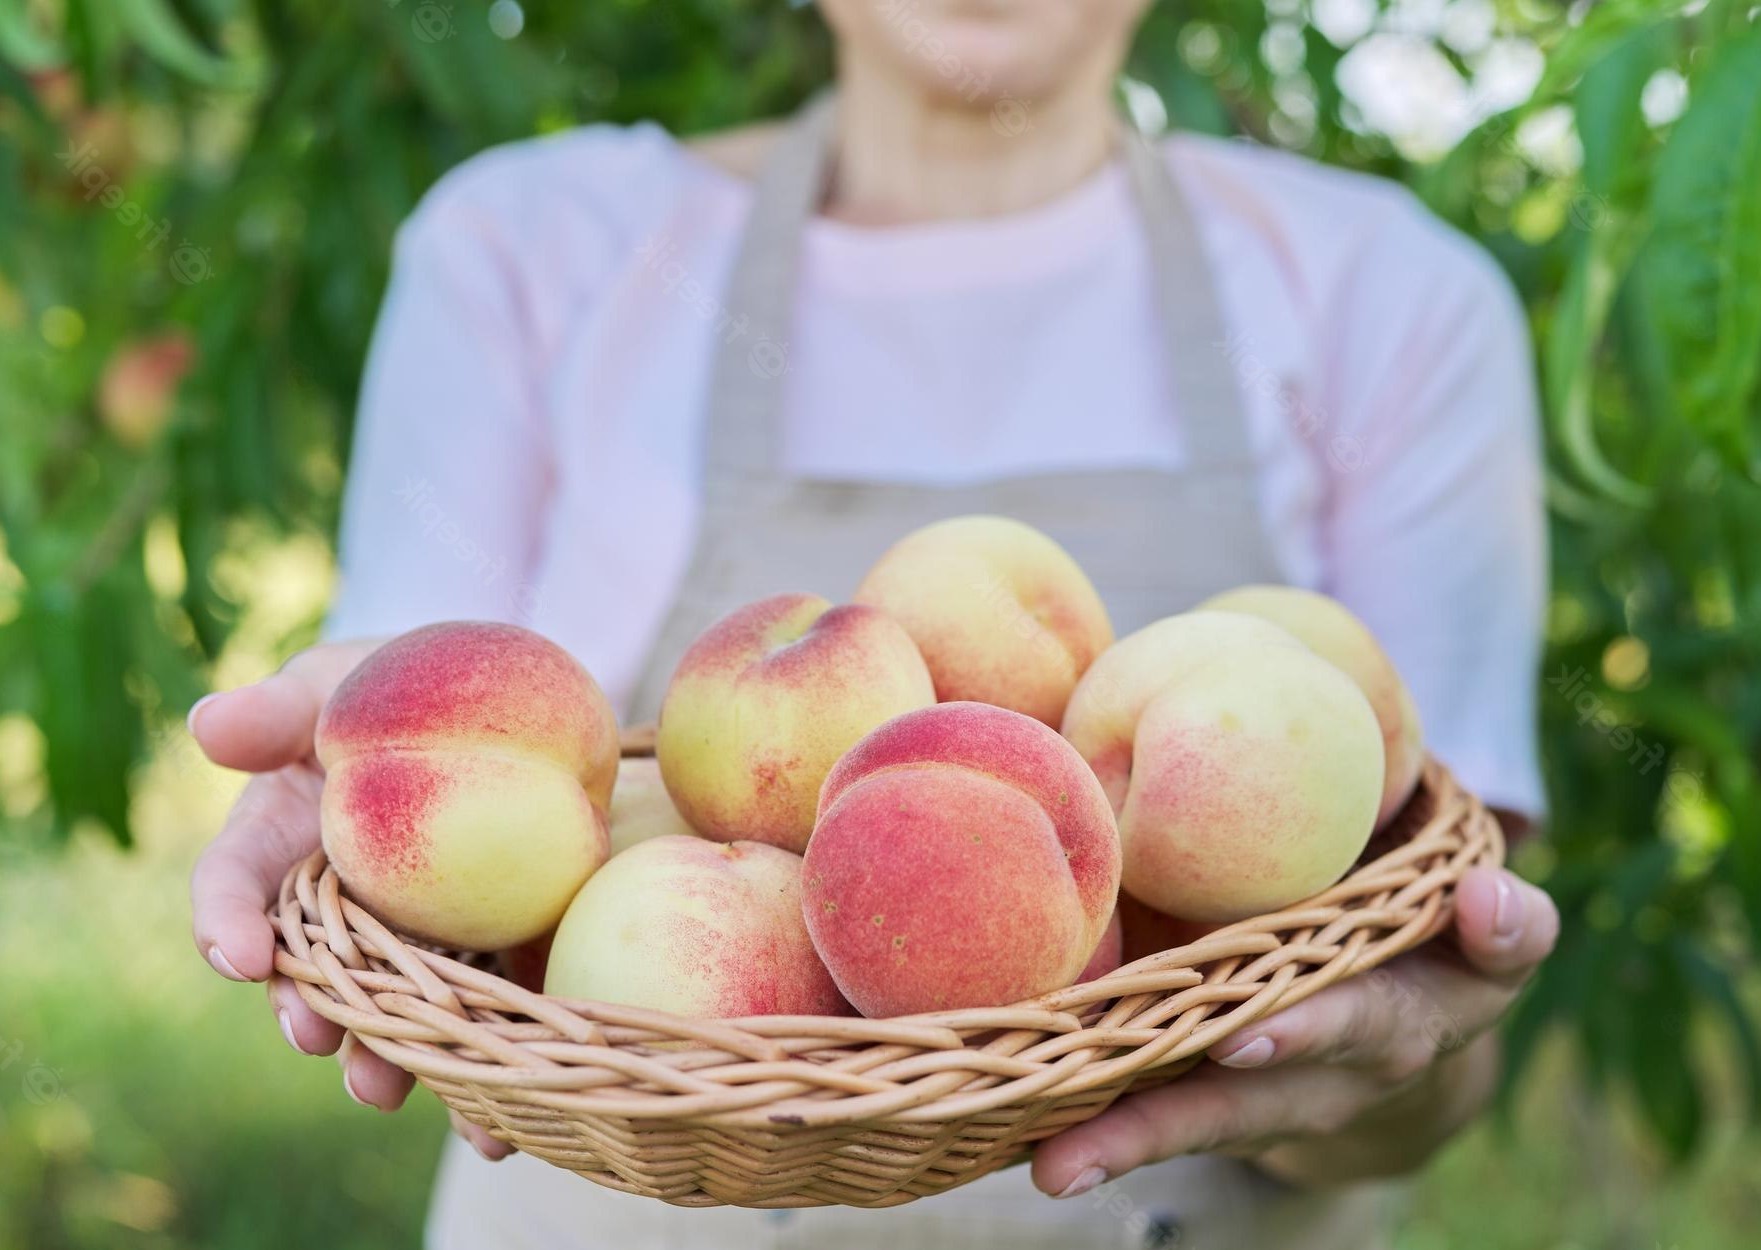 Woman holding a Basket of Peaches